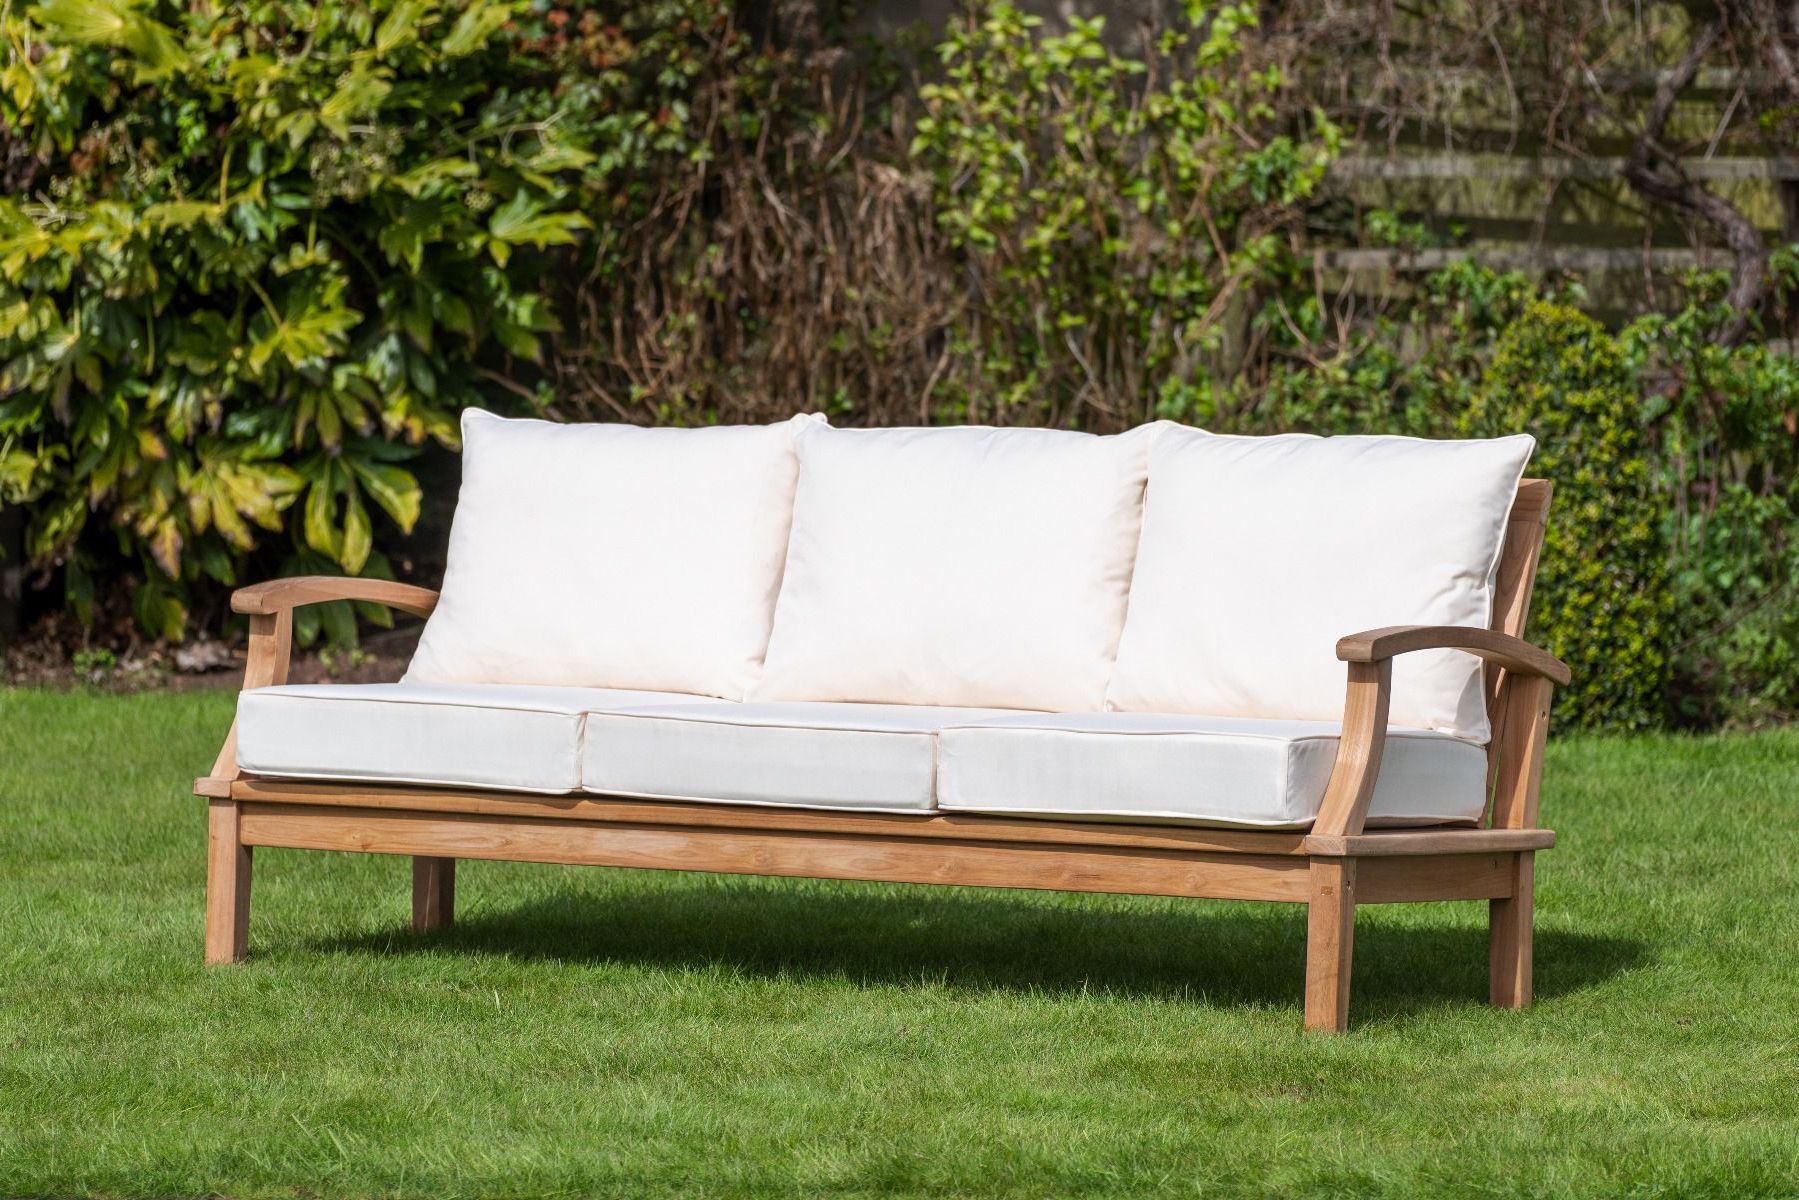 Sloane & Sons Throughout Fashionable Wood Sofa Cushioned Outdoor Garden (View 2 of 15)